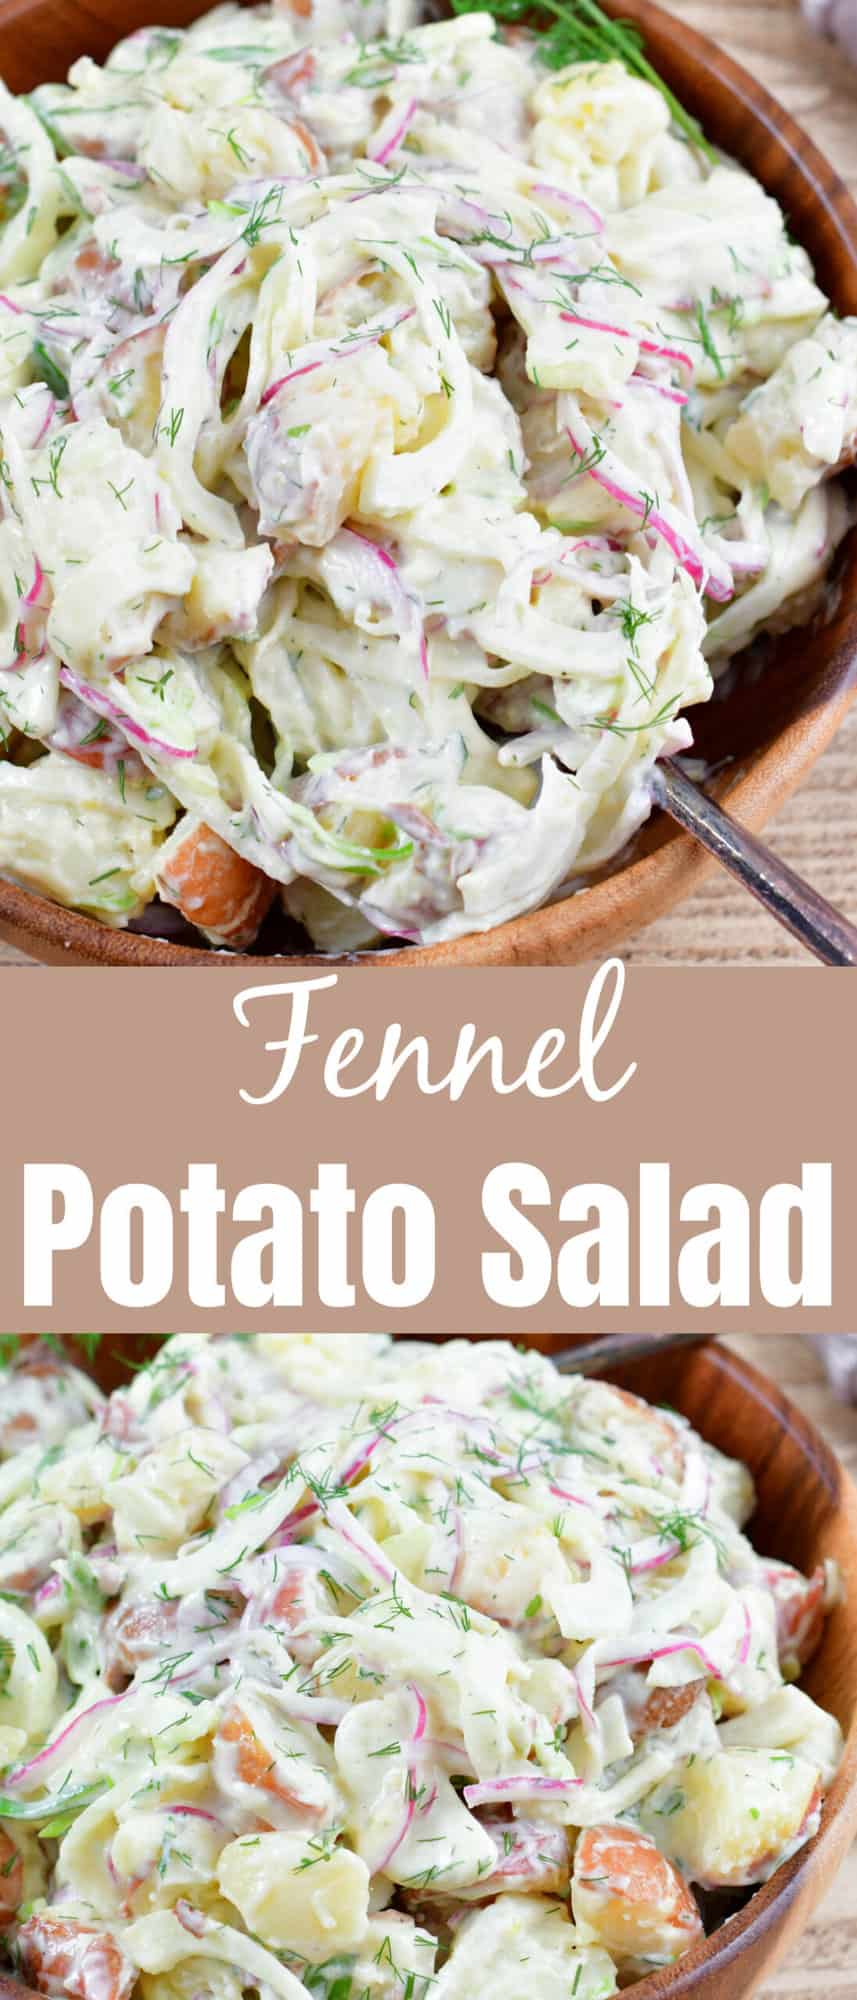 collage of two closeup images of potato salad with fennel